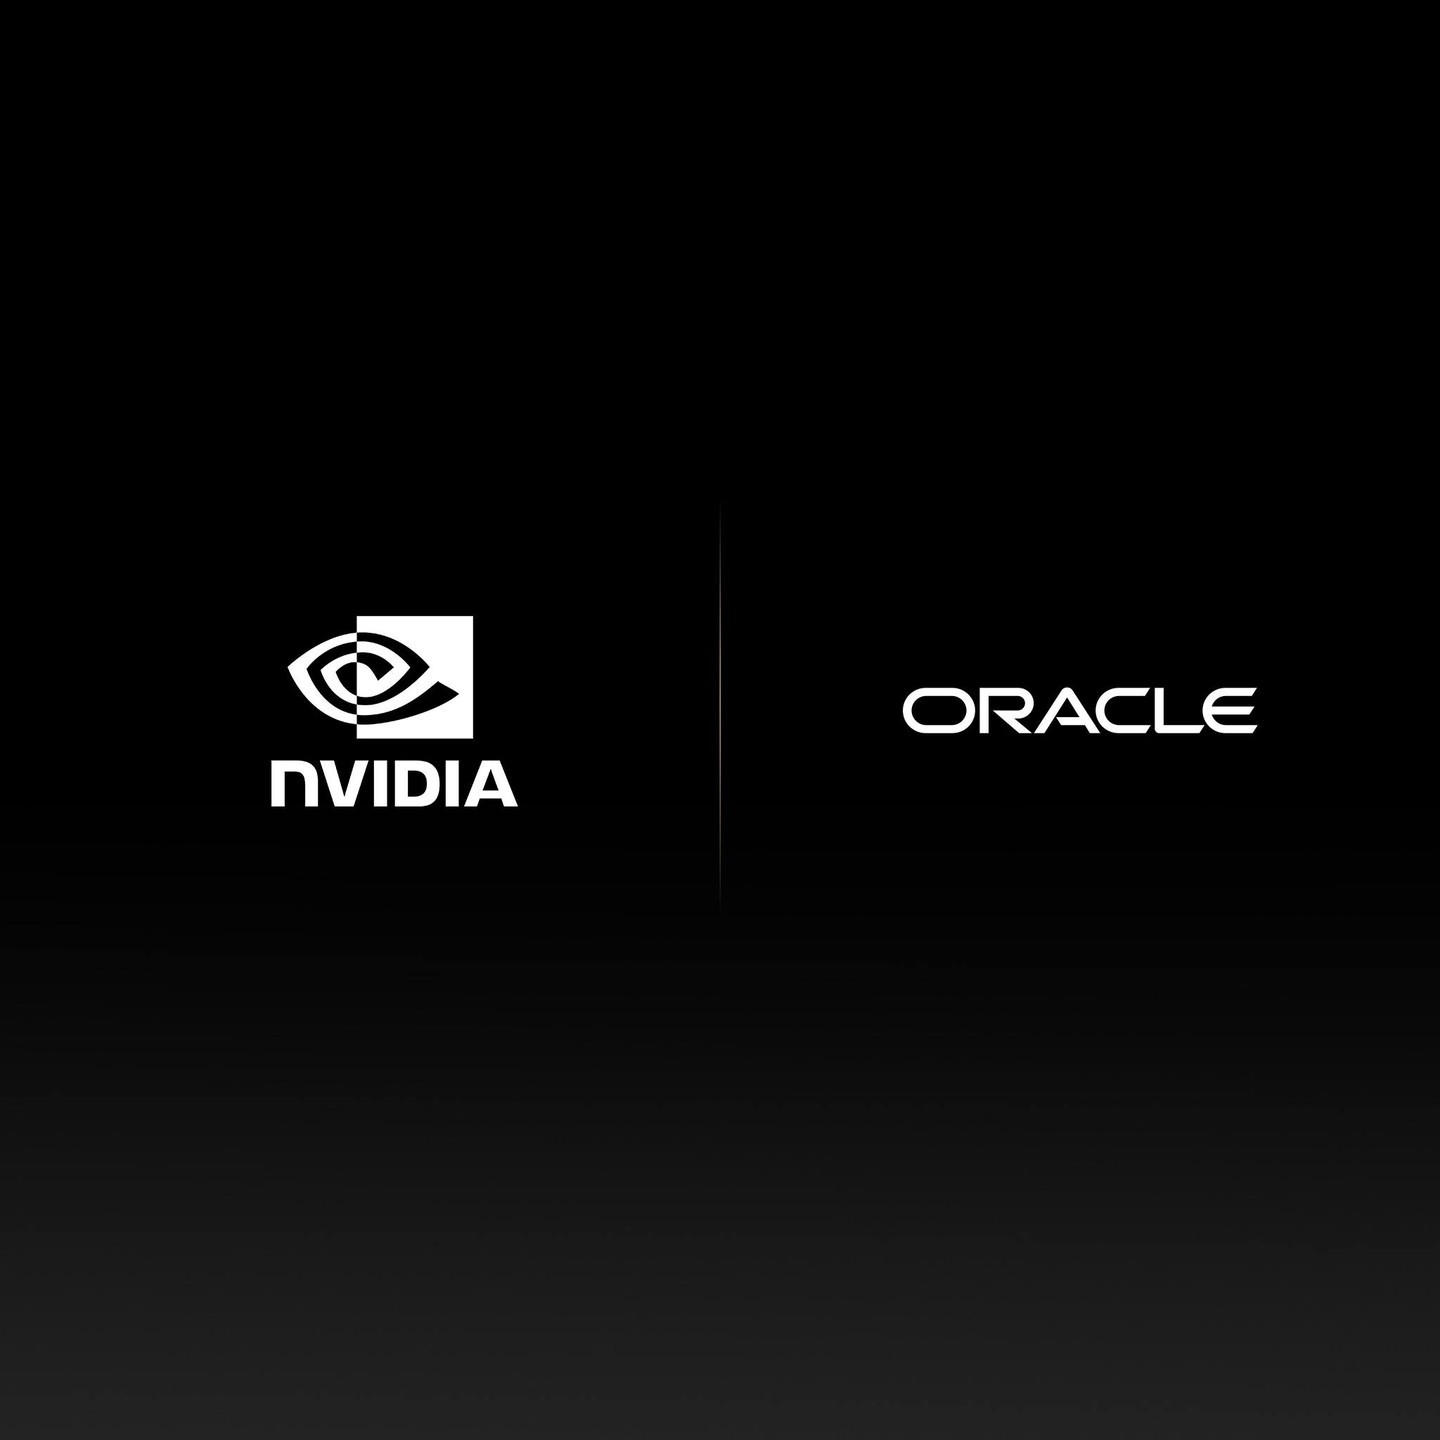 NVIDIA - Today at #CloudWorld, we announced a multi-year partnership with #Oracle to help customers